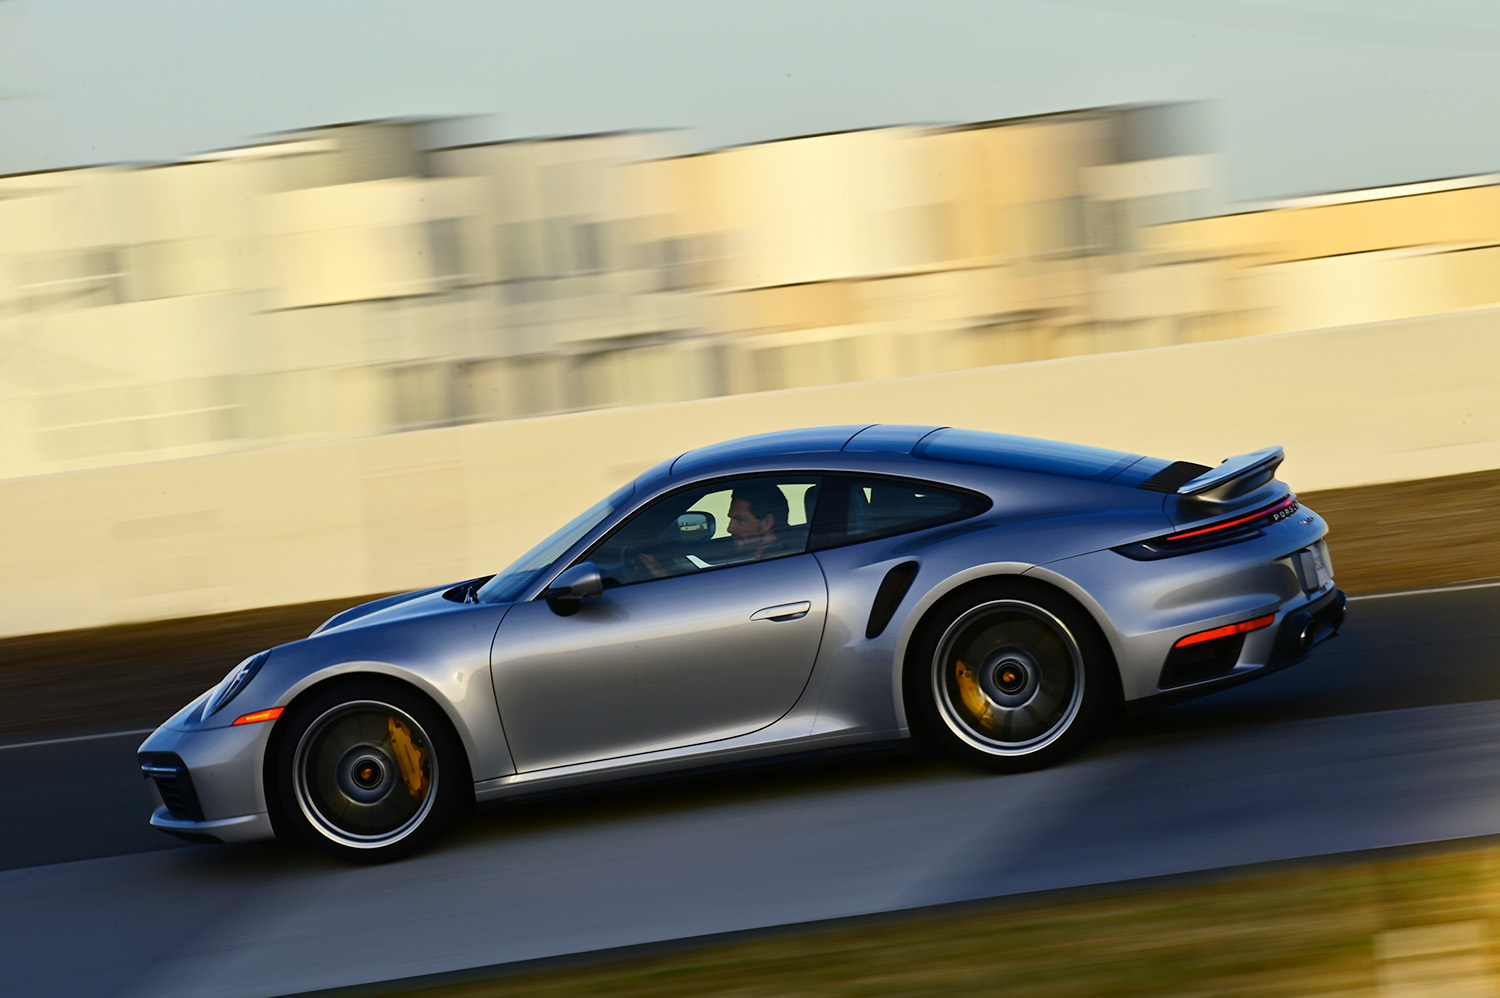 2022 Porsche 911 Turbo S on track at Porsche Experience Center LA, shot from Driver side